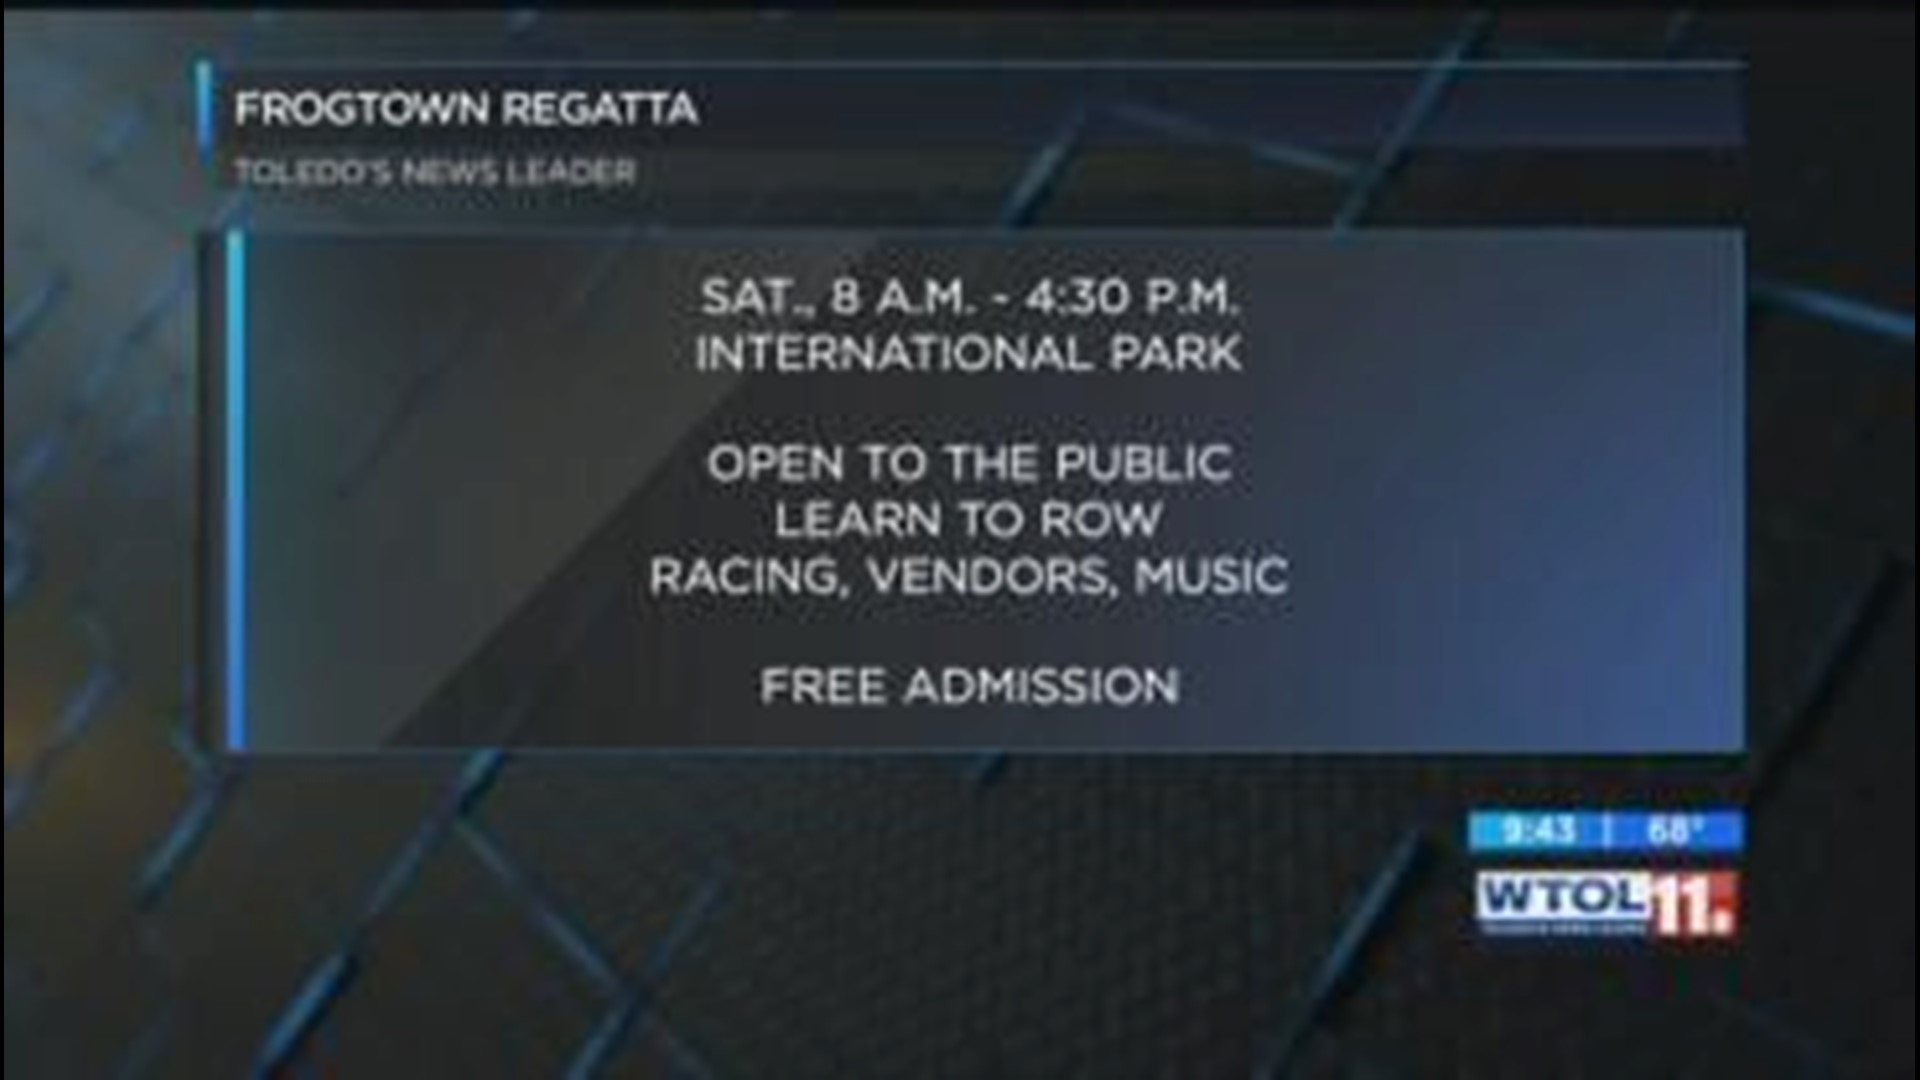 Check out the Frogtown Regatta this weekend